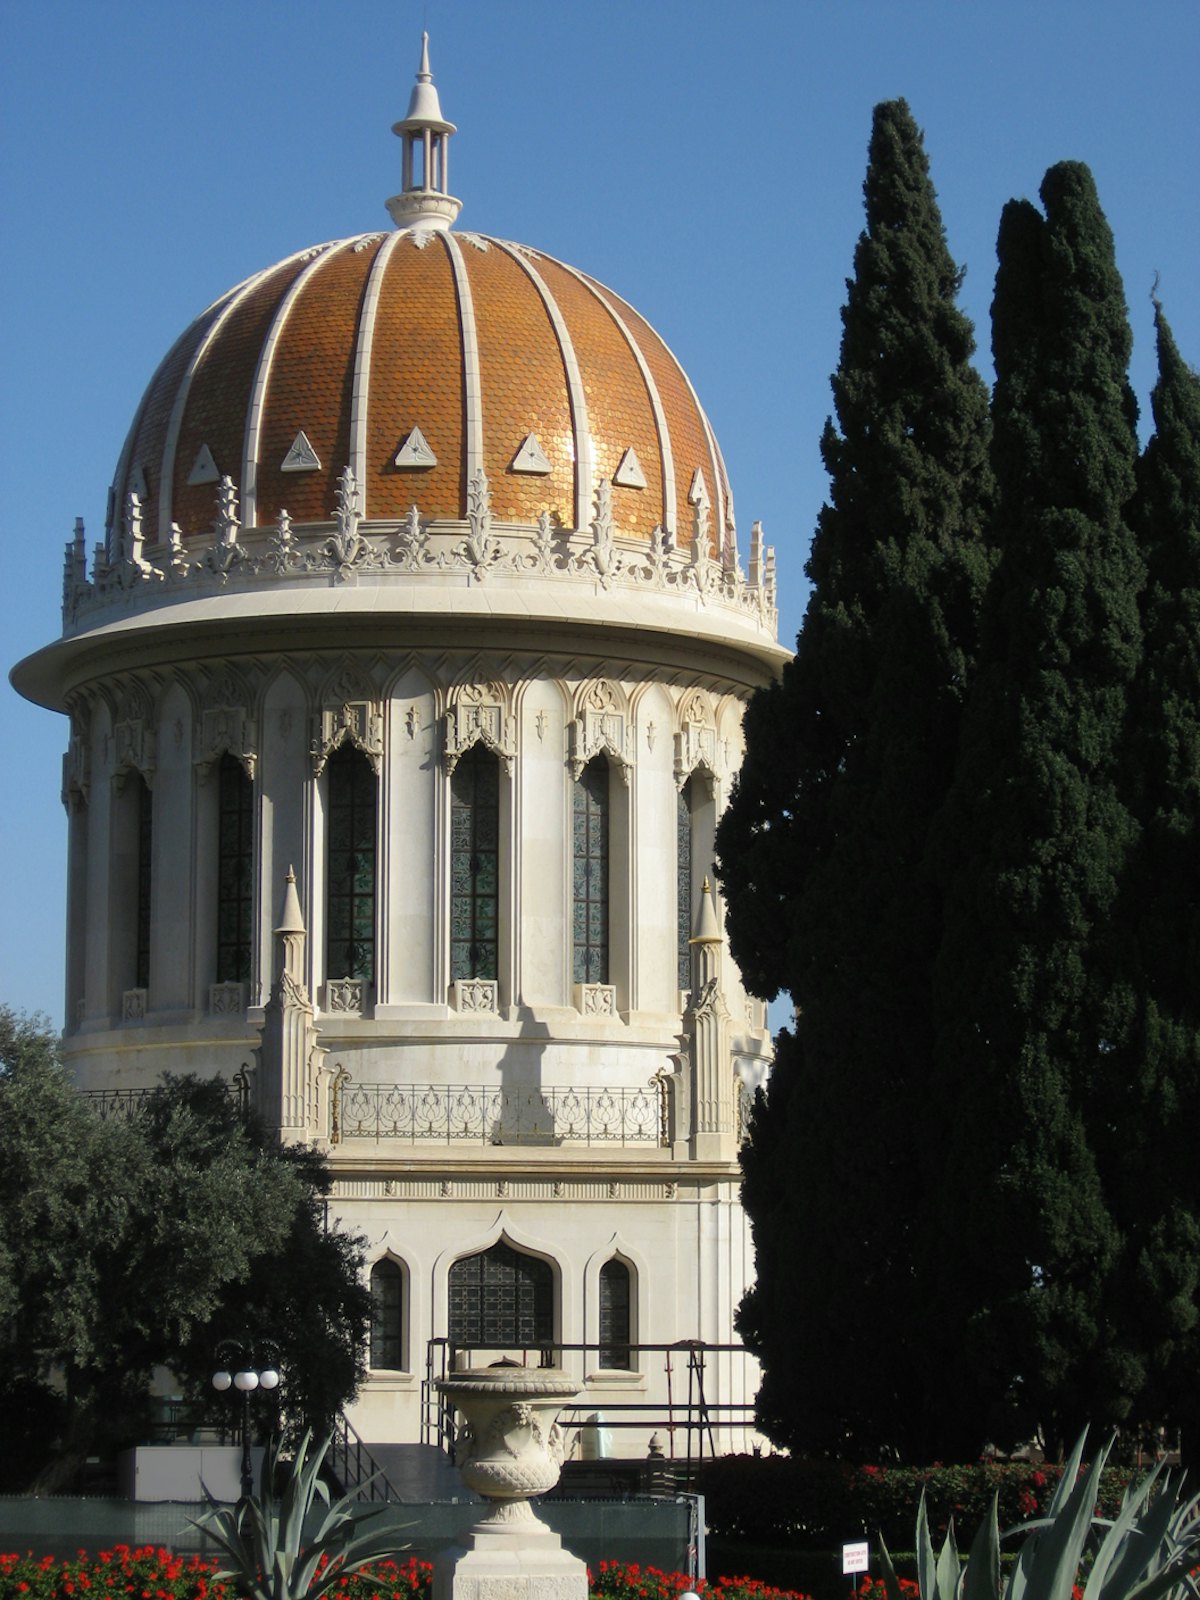 The golden dome of the Shrine of the Bab is one of Haifa's most prominent landmarks. This photograph was taken at the start of the current work, before the building was shrouded. The restoration will not alter the appearance of the building. (BWNS photo)